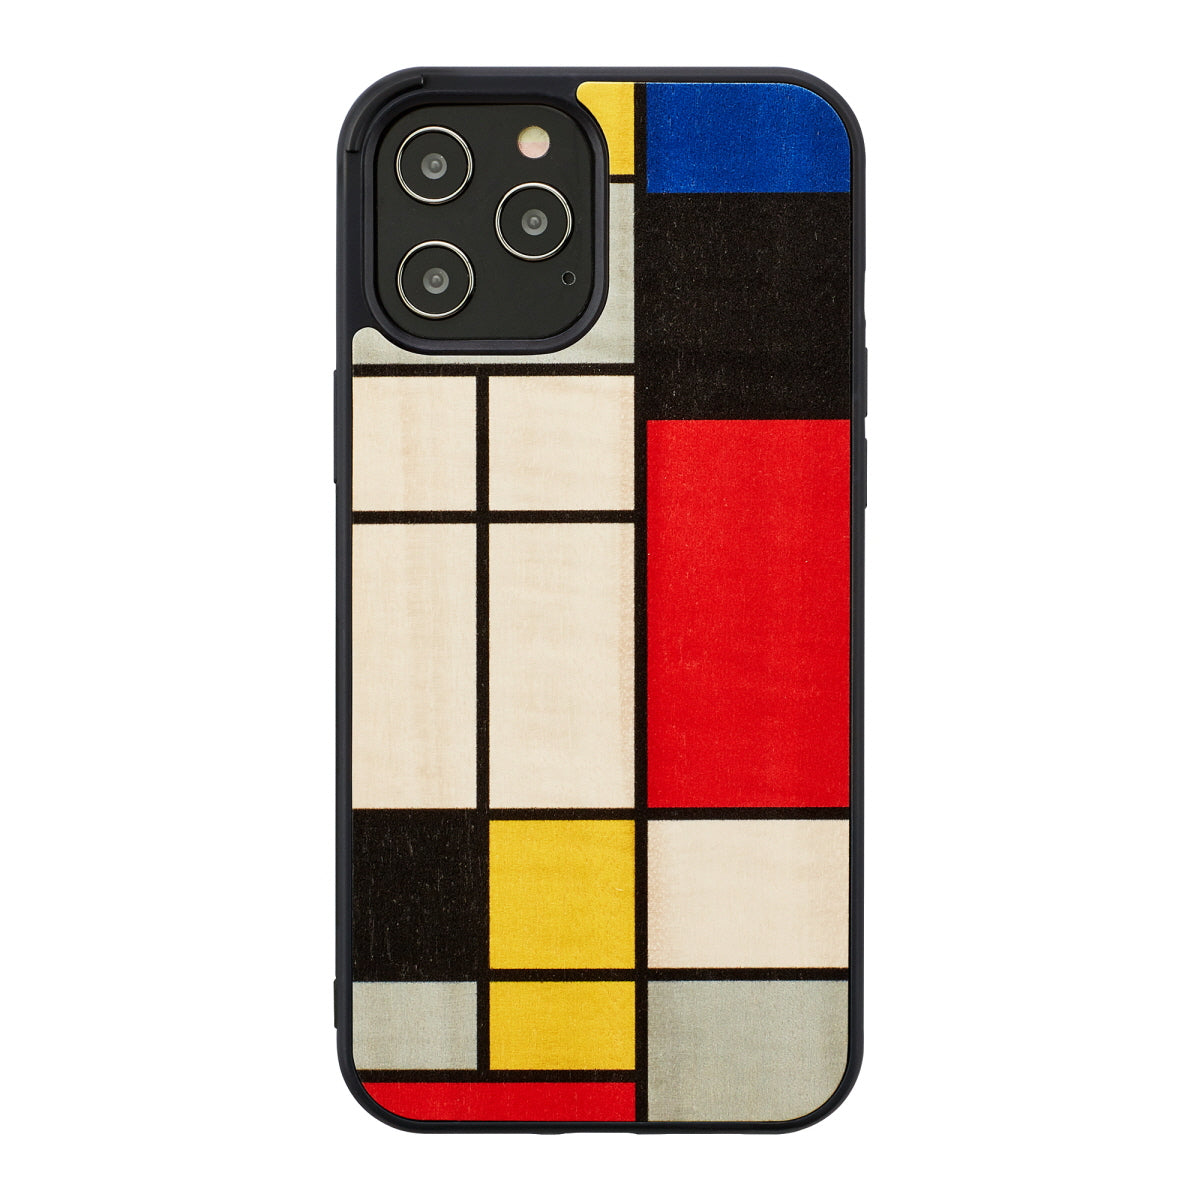 Man & Wood Case For iPhone 12 Pro Max - Mondrian Wood